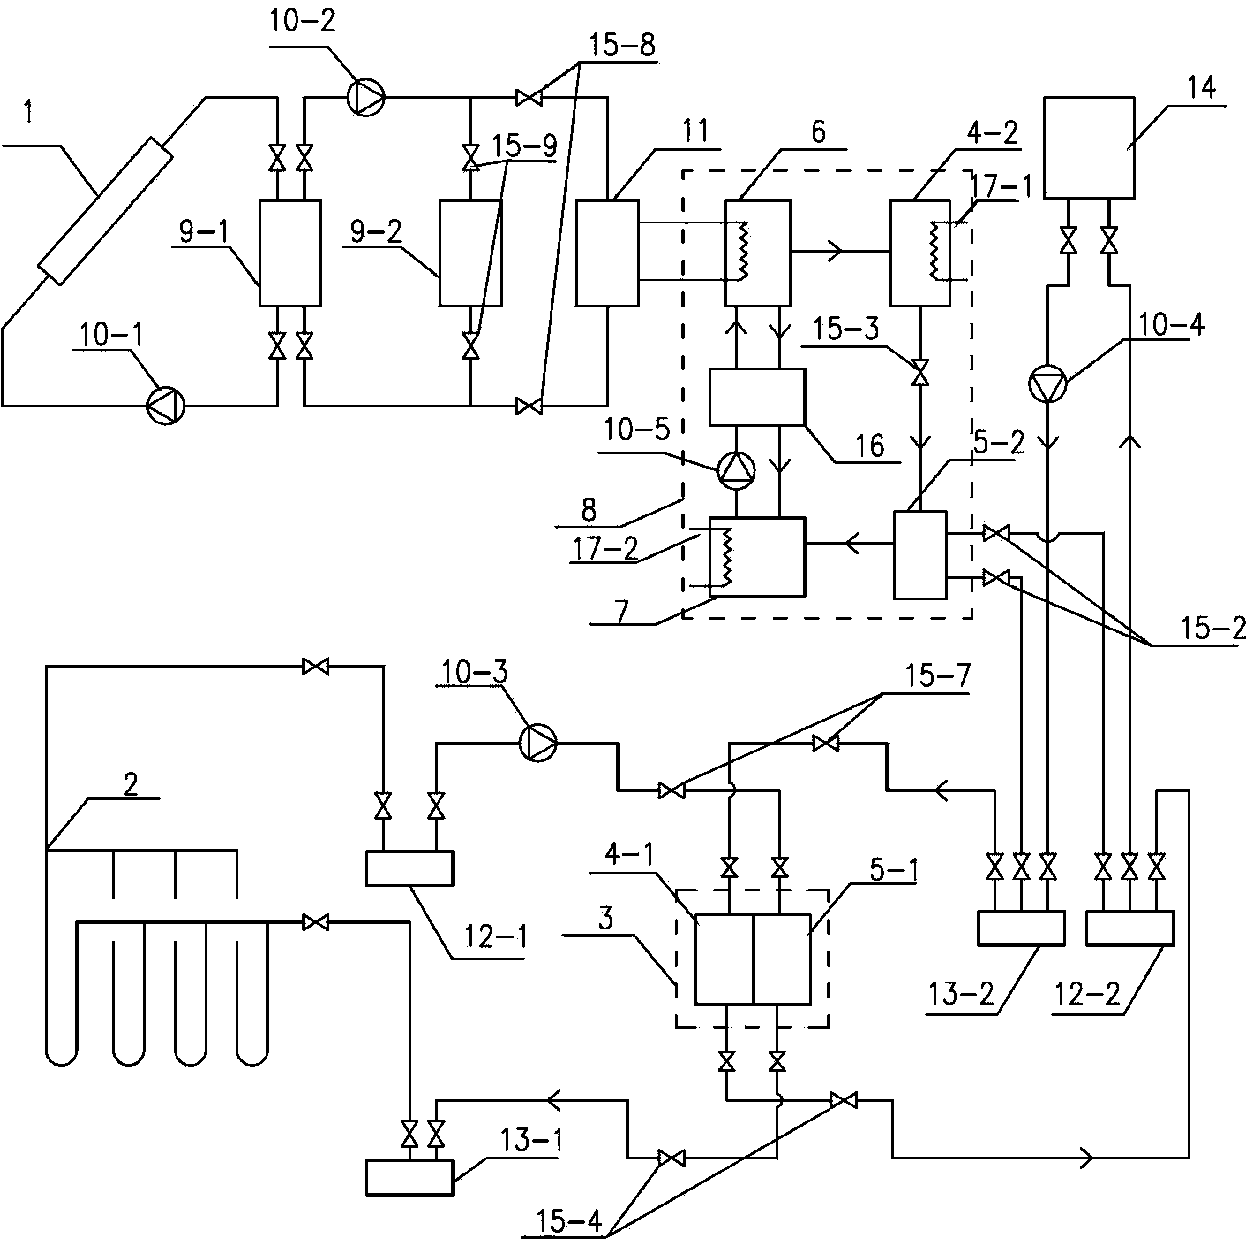 Heat exchange system in combined operation of solar energy and geothermal energy